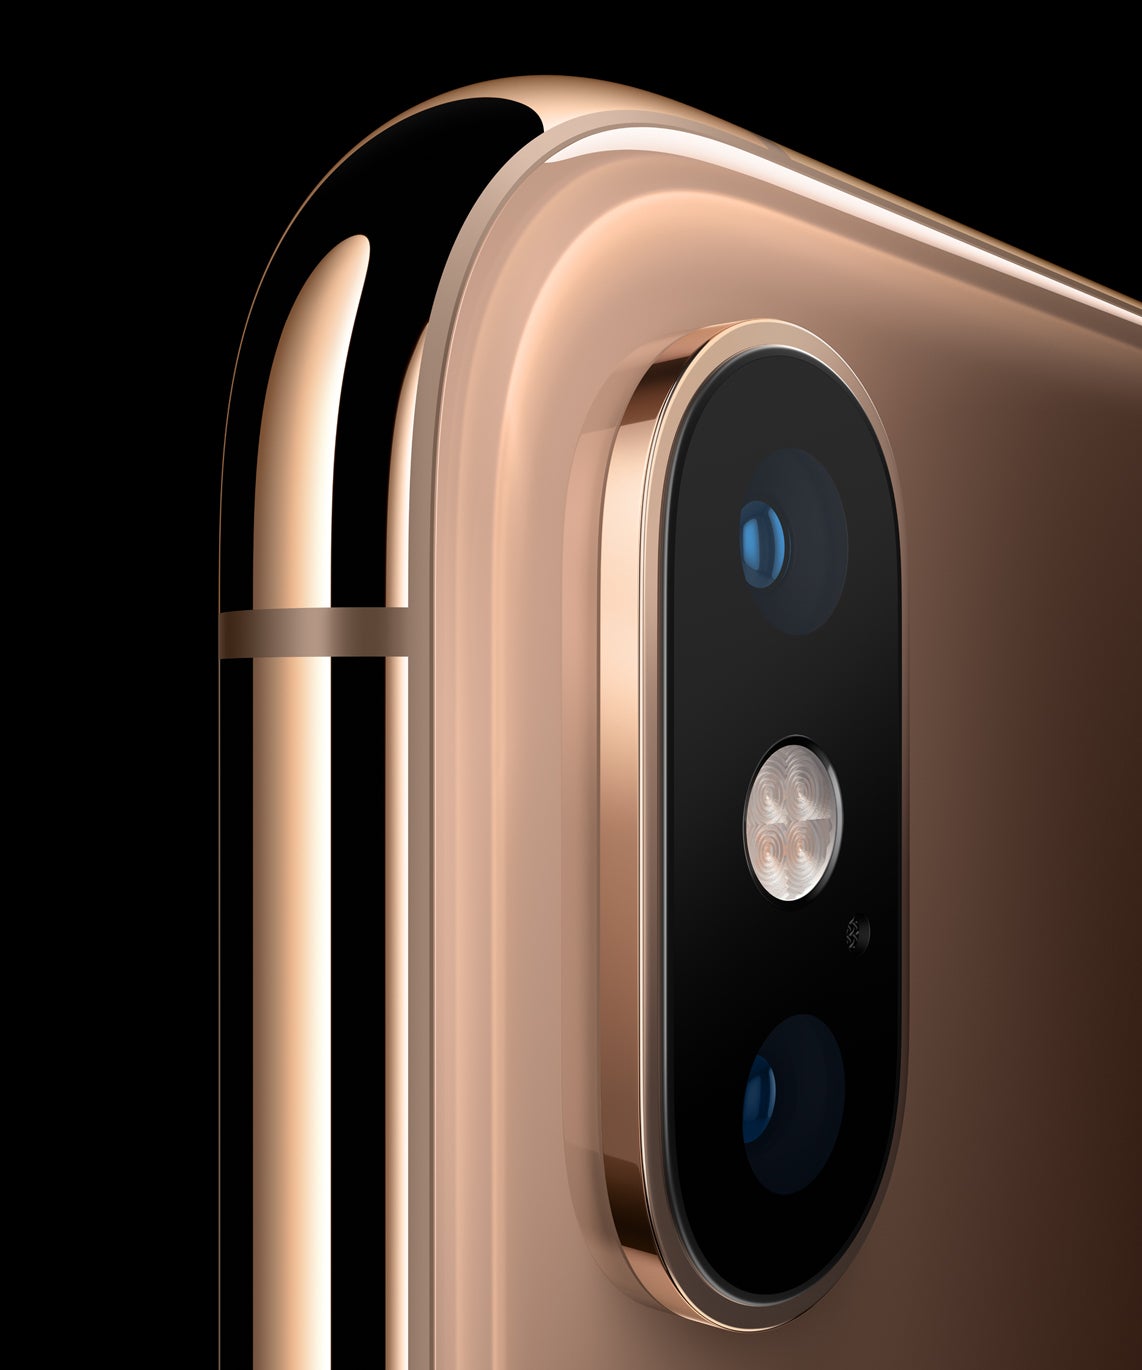 iPhone XS specs, price, features, and release date Macworld